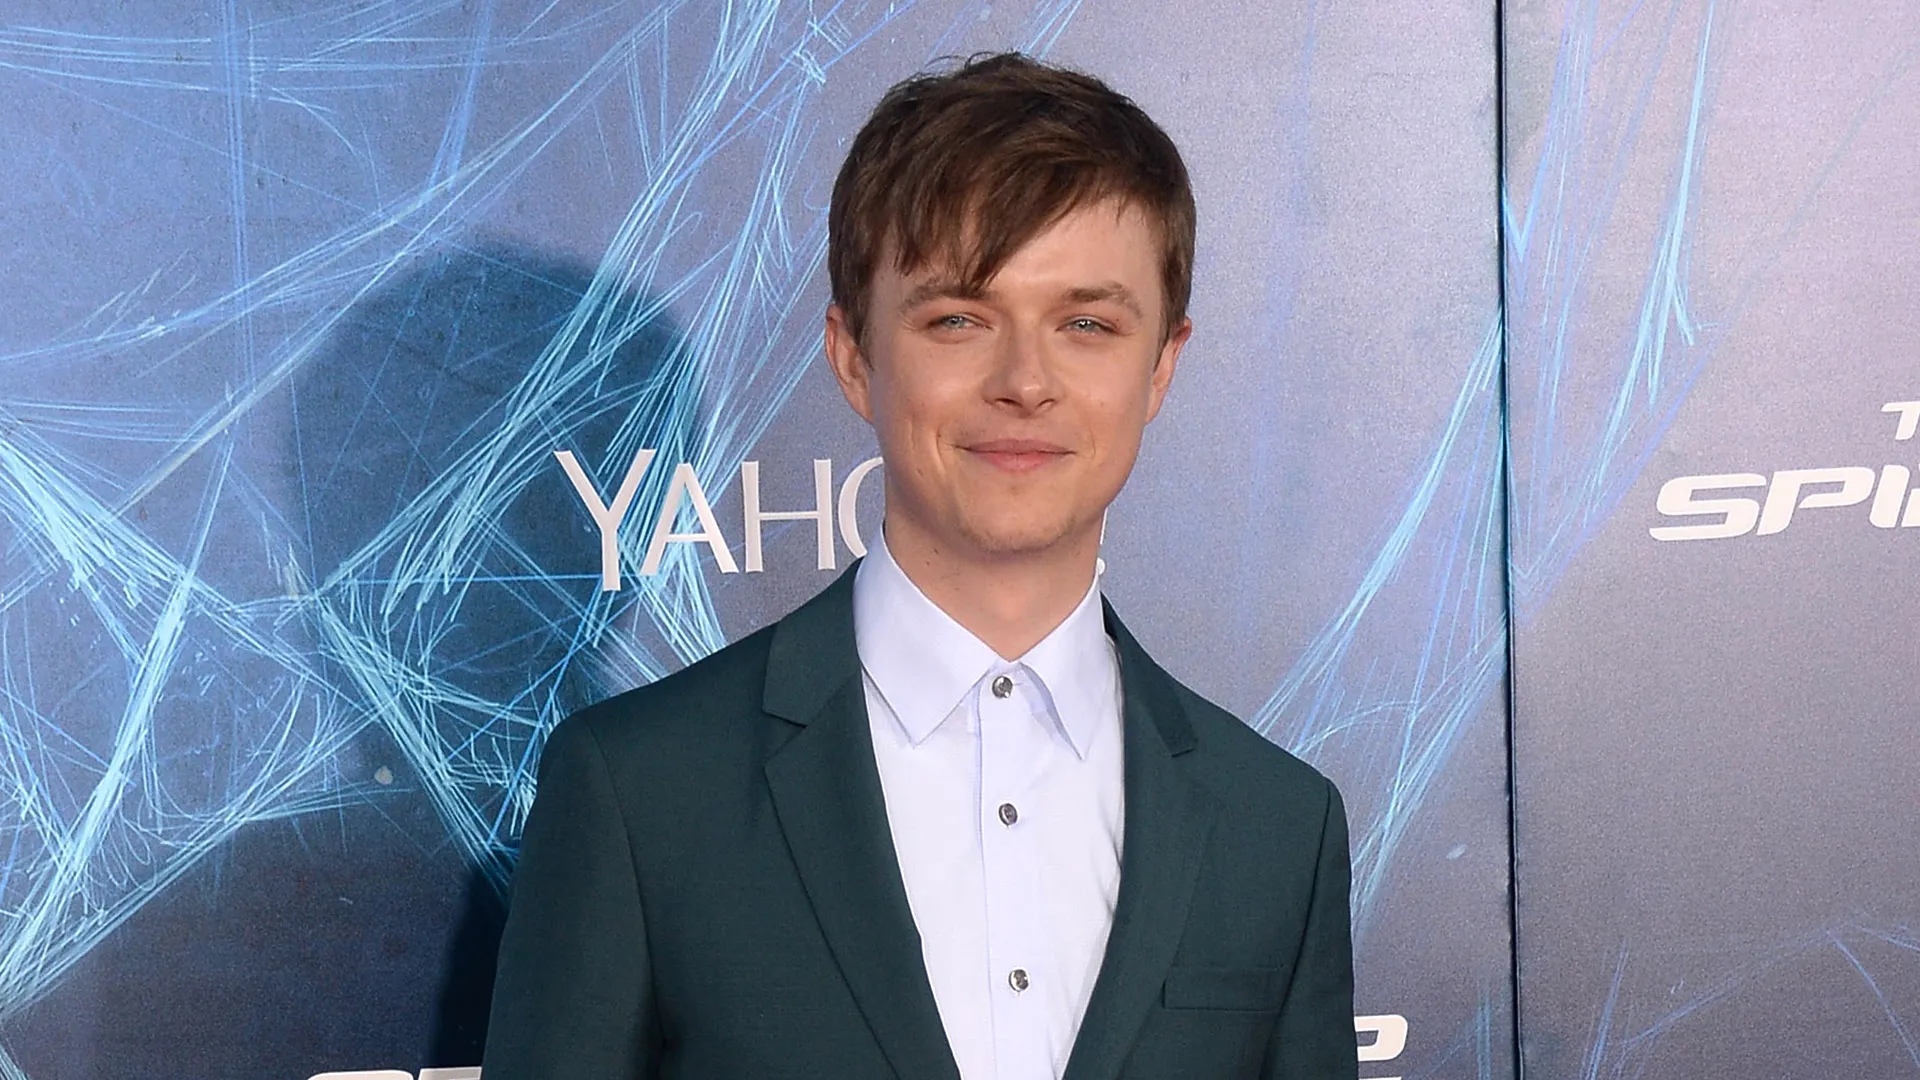 17 Enigmatic Facts About Dane DeHaan - Facts.net